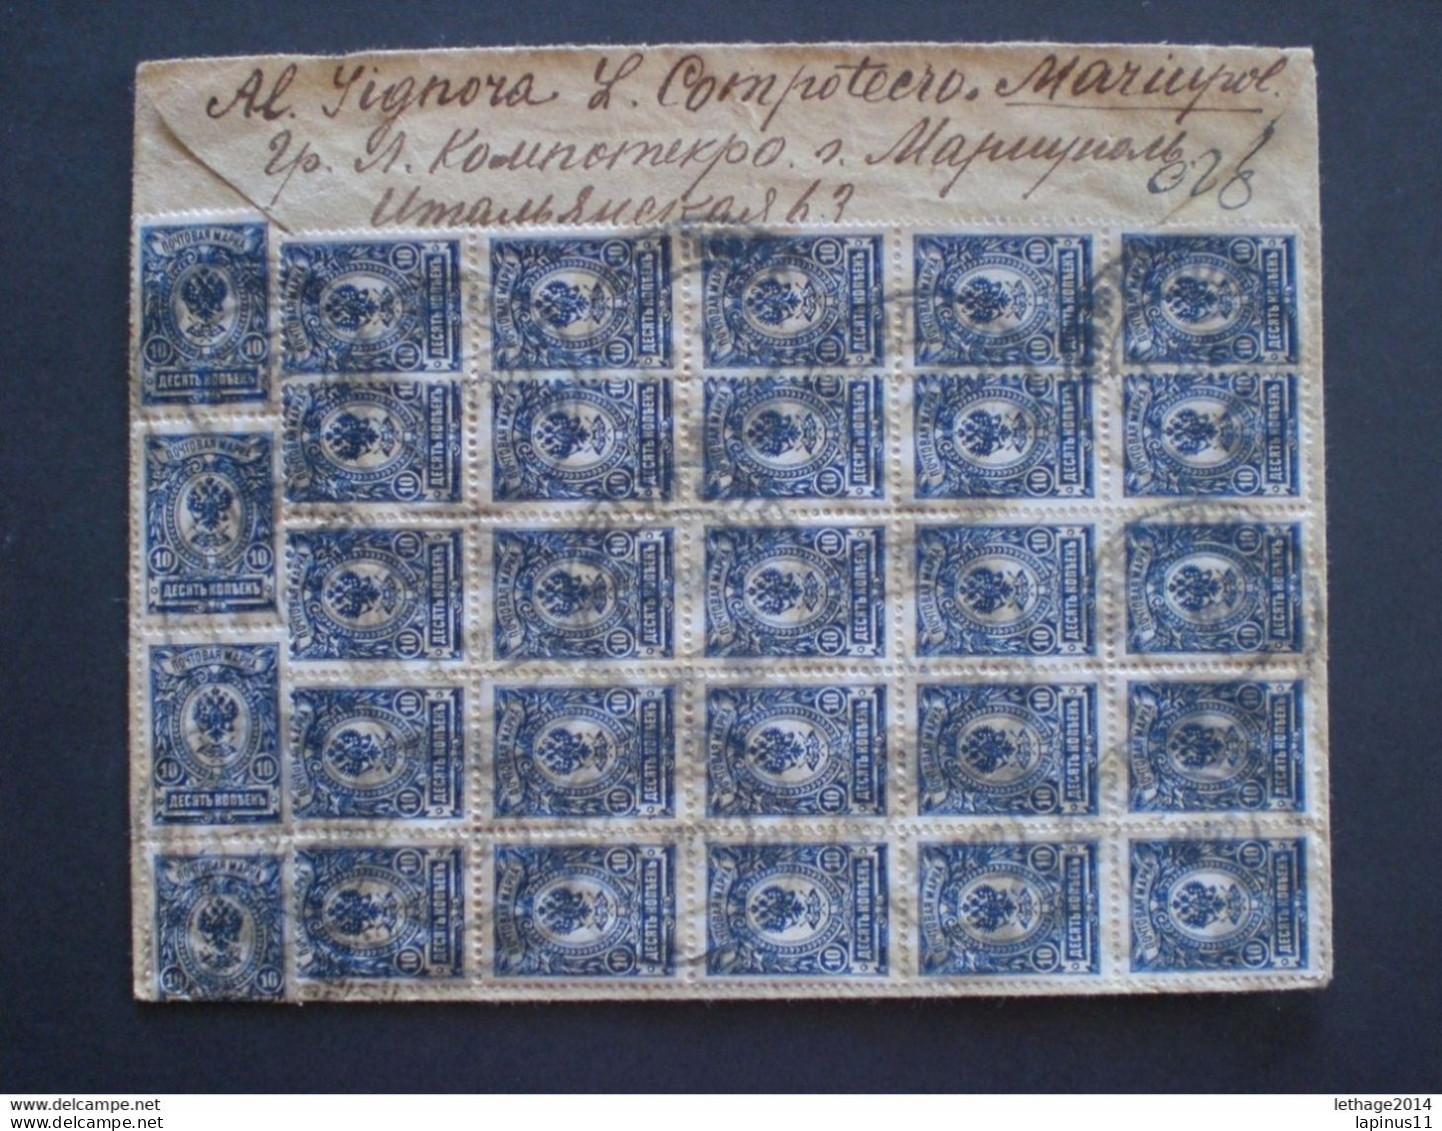 RUSSIA RUSSIE РОССИЯ STAMPS COVER 1923 Registered Mail RUSSIE TO ITALY MANY STAMPS FULL 30 STAMPS !! RRRRR RIF.TAGG.(2) - Briefe U. Dokumente